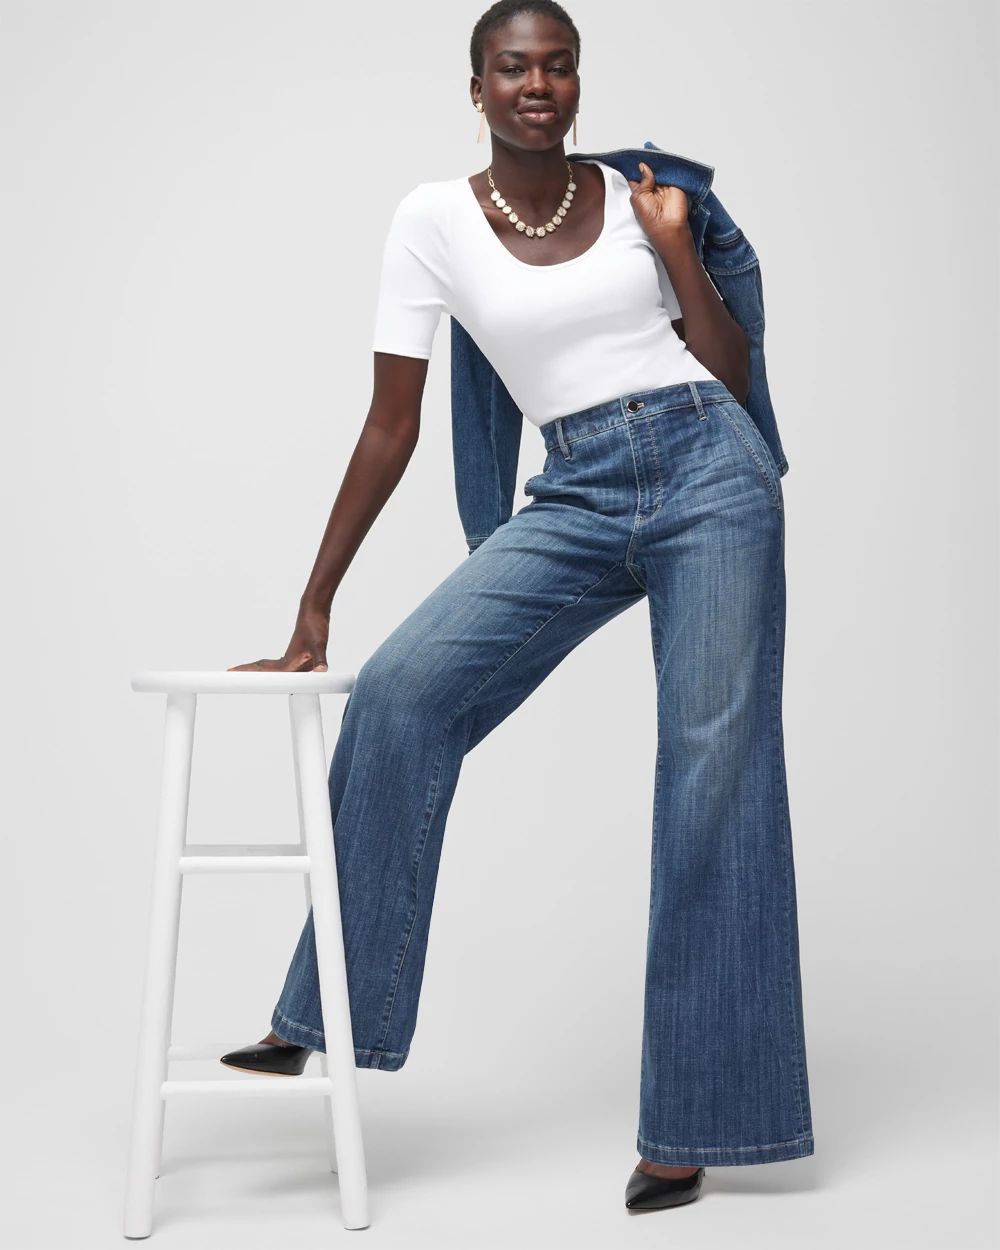 Curvy Extra High-Rise Everyday Soft Denim  Wide Leg Jeans click to view larger image.